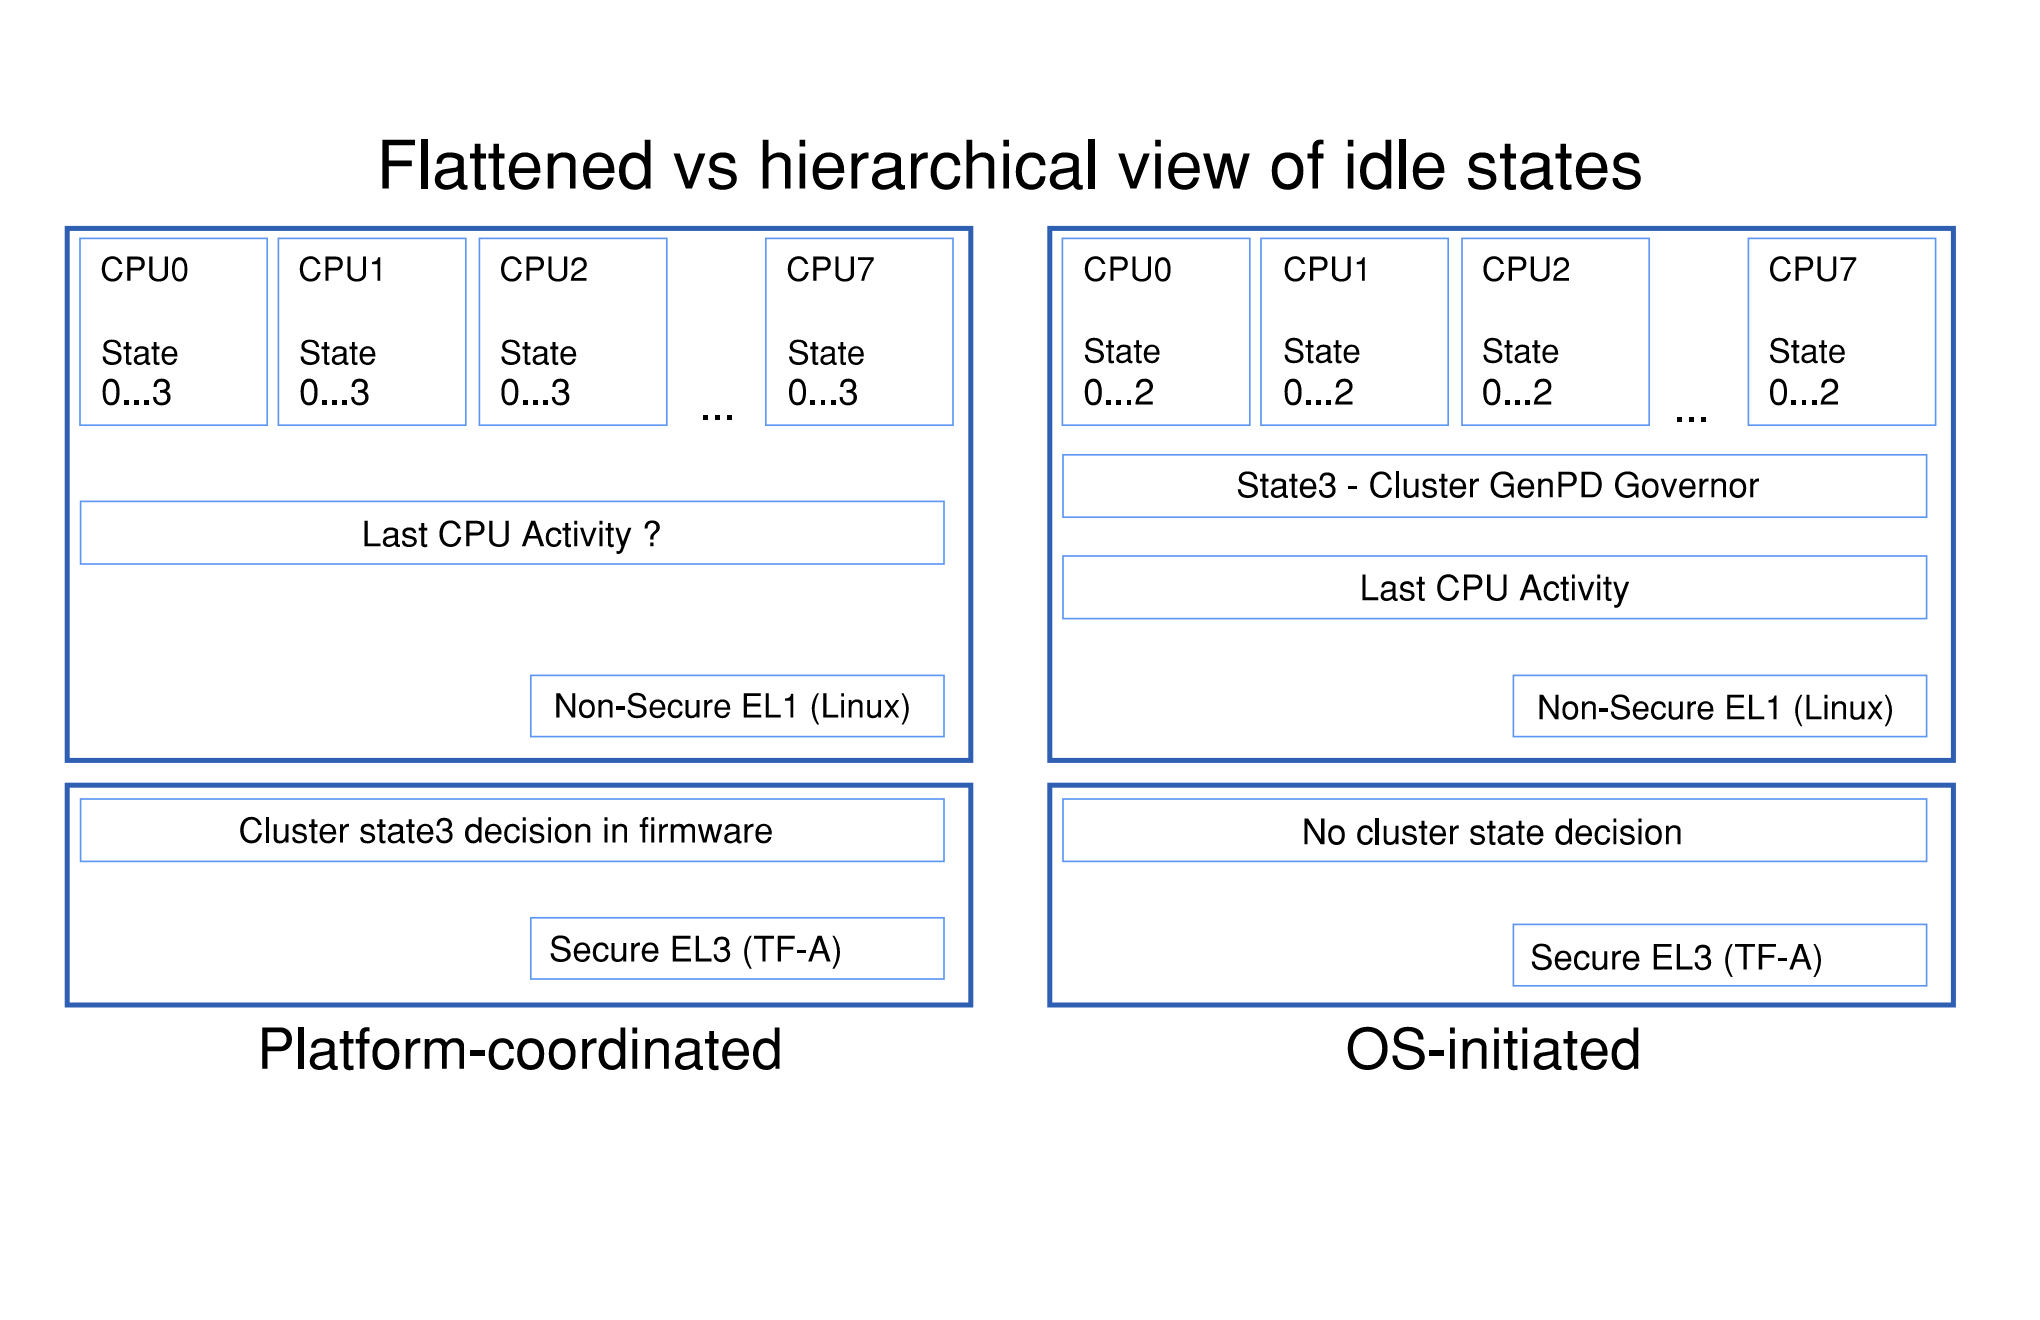 ../_images/psci-flattened-vs-hierarchical-idle-states.png